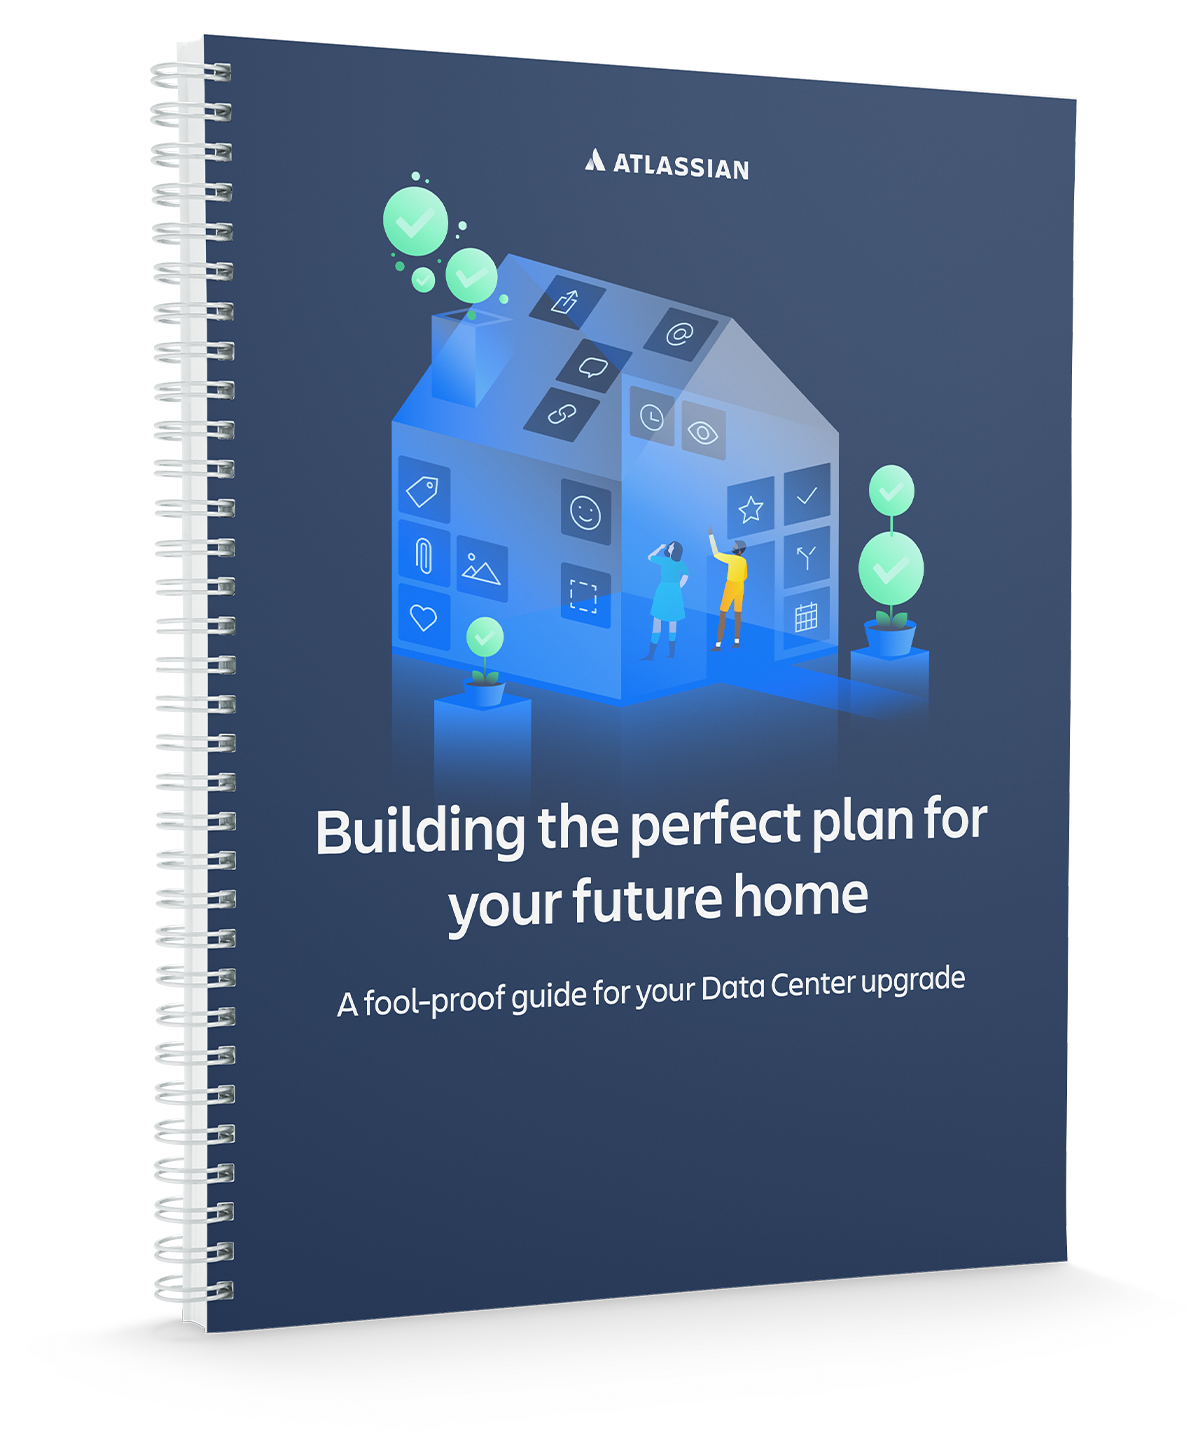 Building the perfect plan for your future home